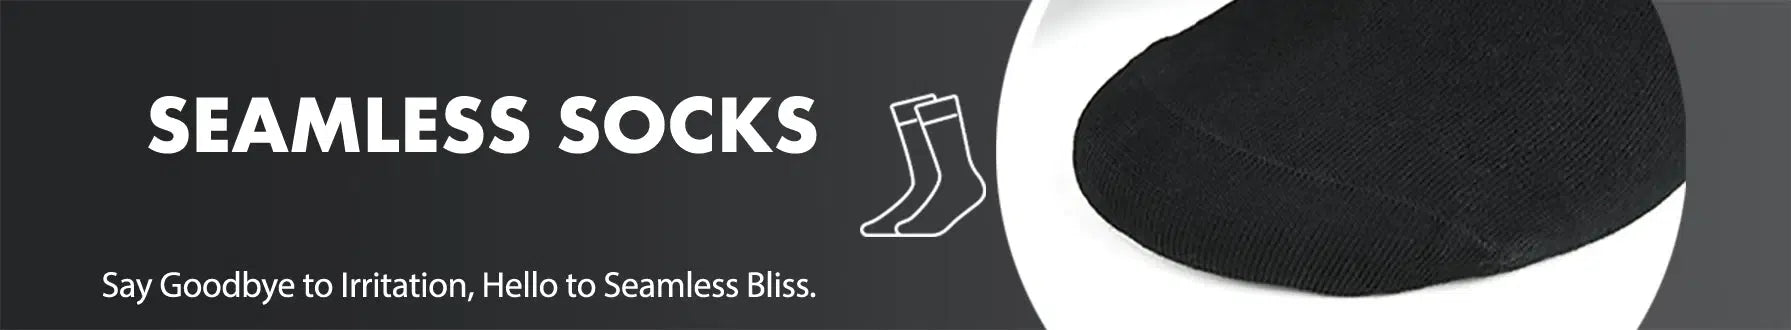 GoWith seamless socks collection banner desktop